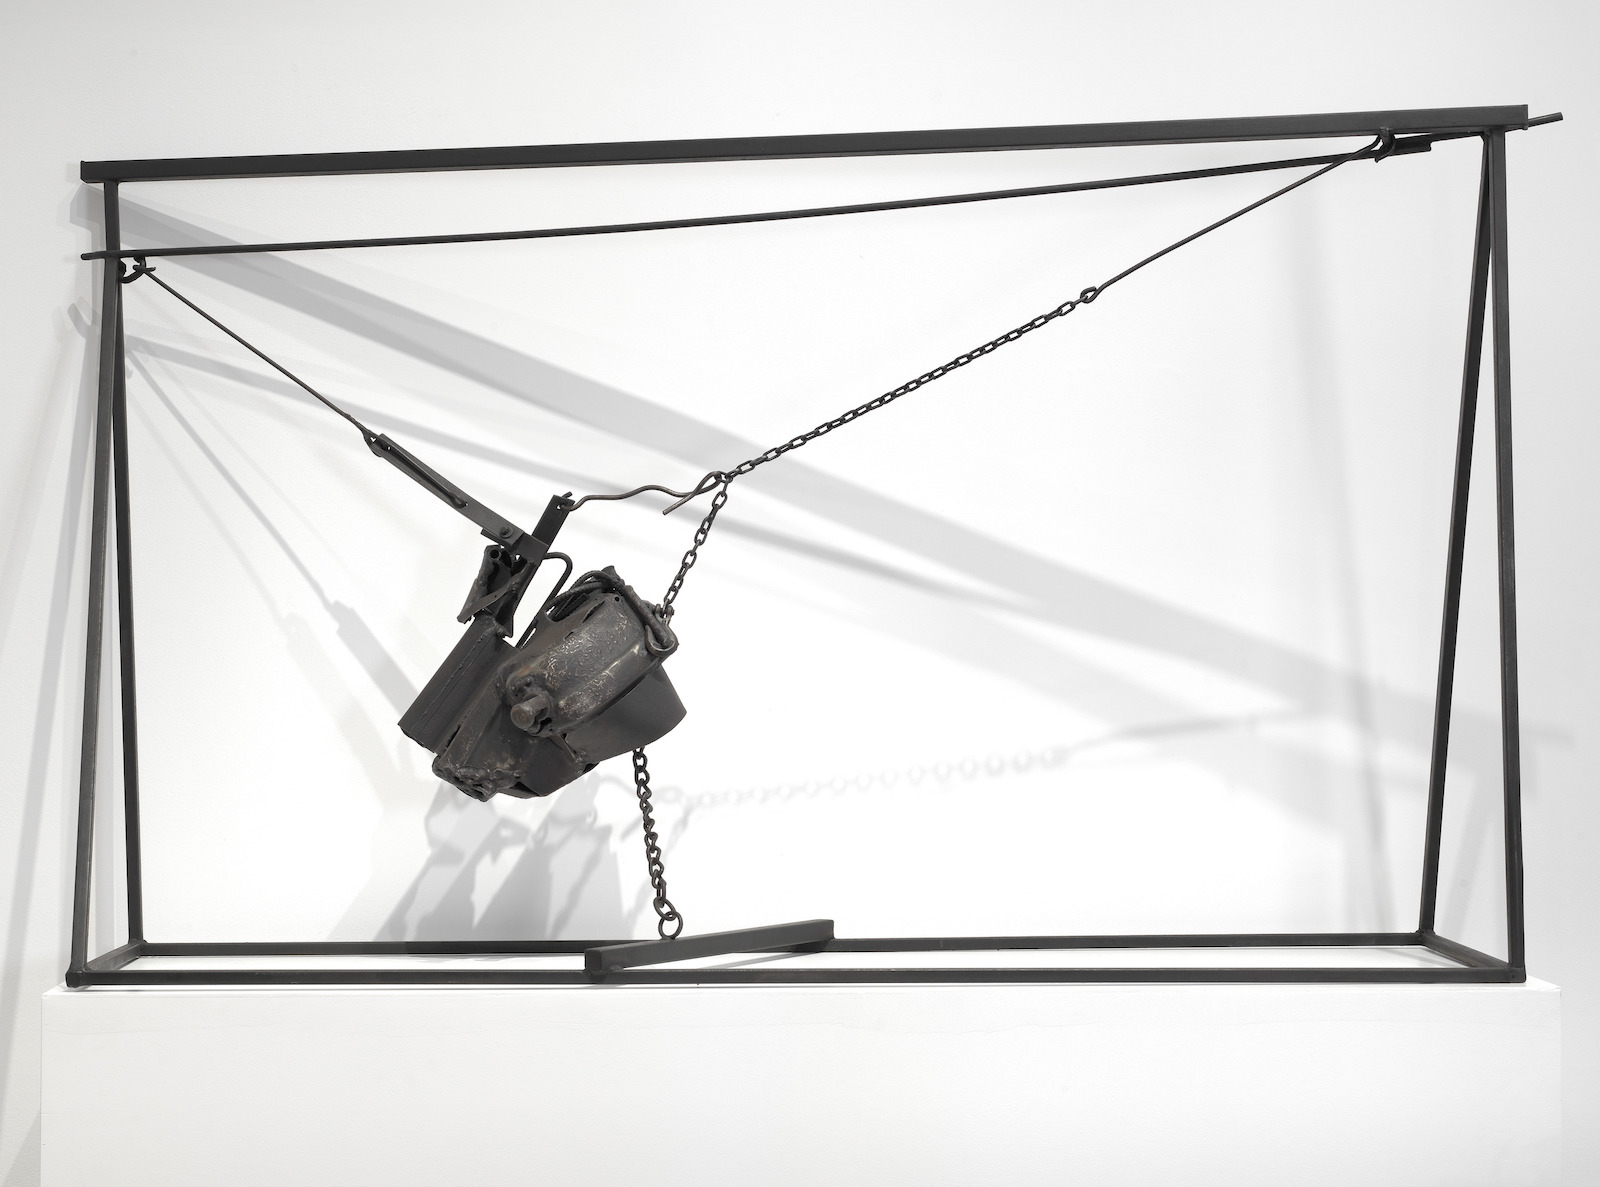 A sculpture in which several welded-together pieces of steel hang suspended between a wire and a chain